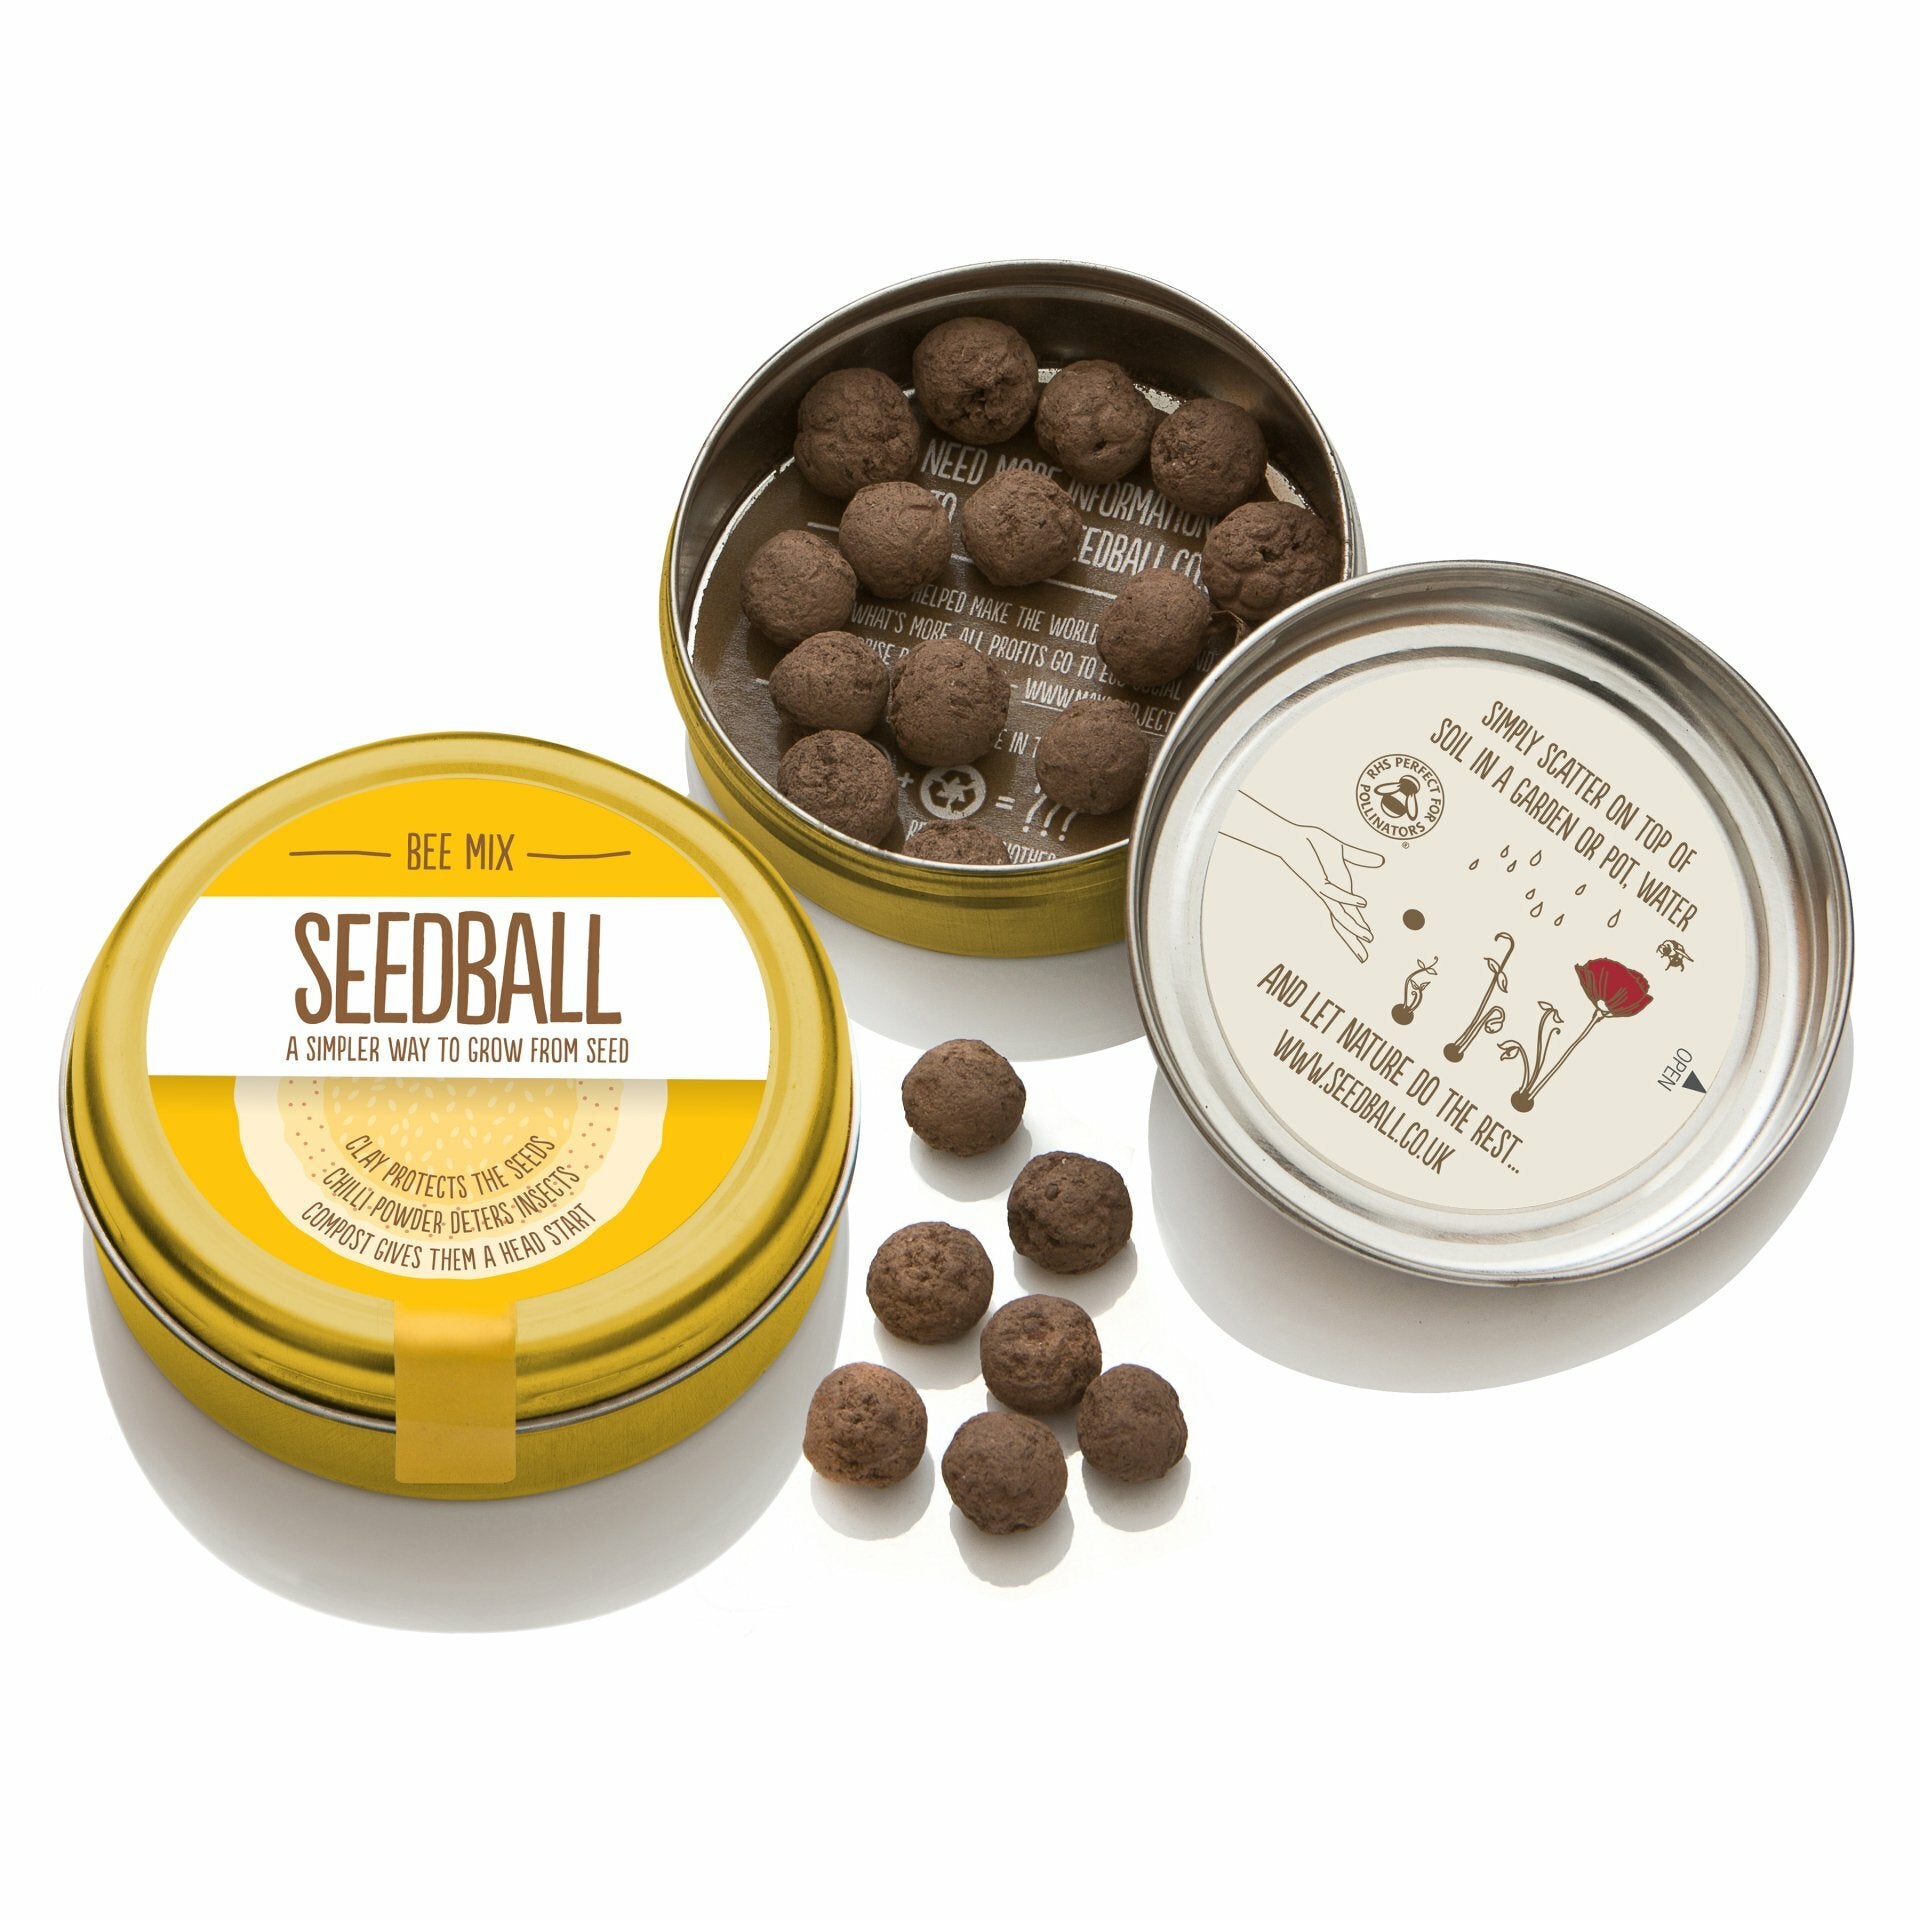 opened tin showing contents of bee mix seedballs gold edition - available from beevive